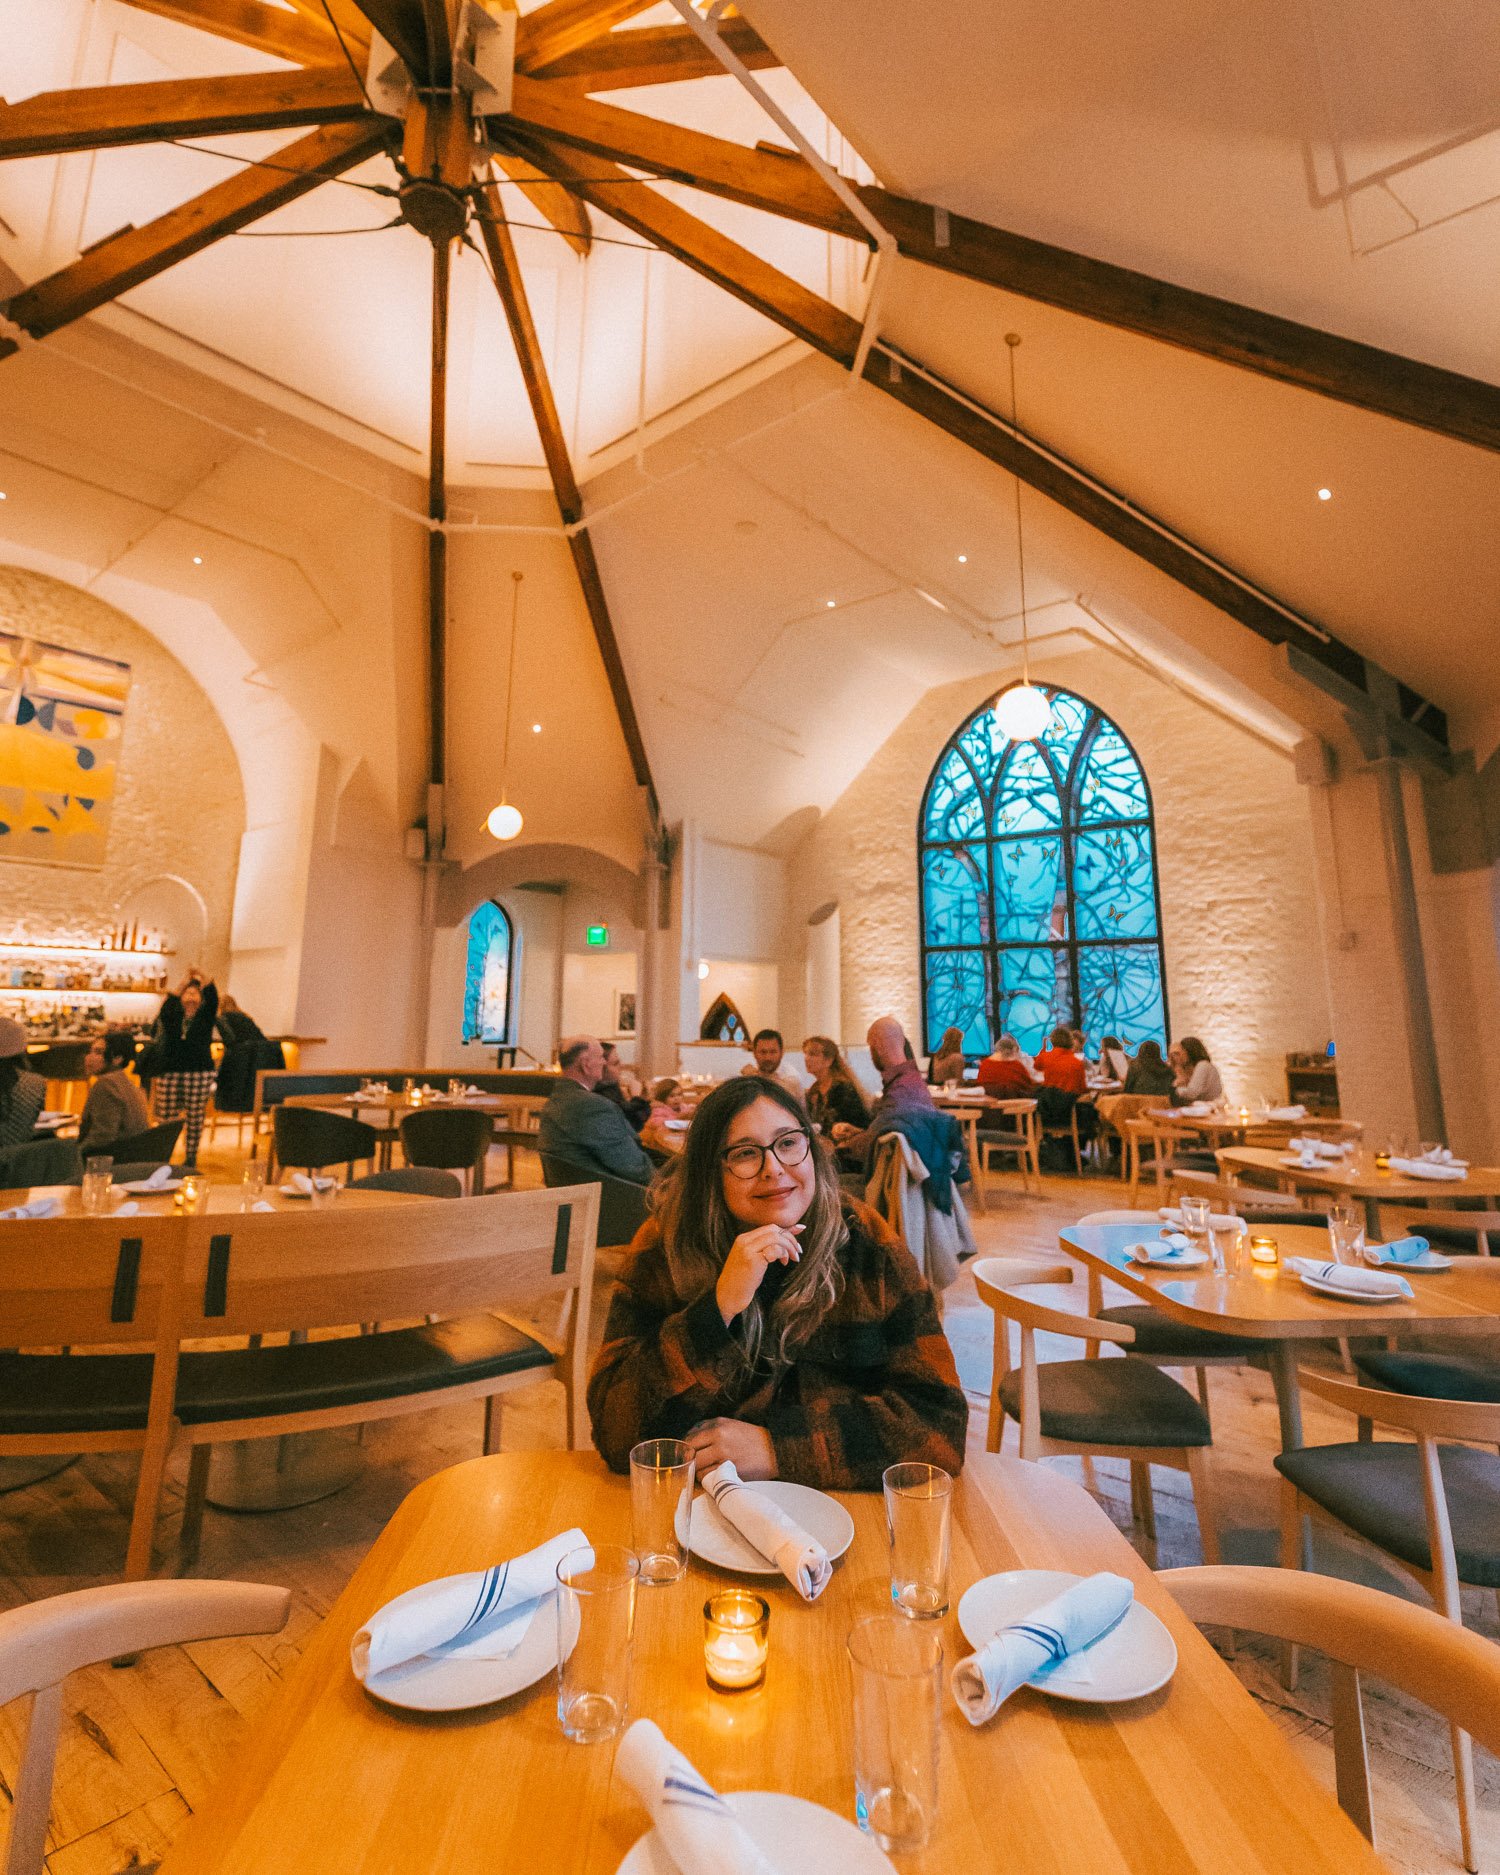 The Best Things to Do in Northwest Arkansas // Dine in a Restored Church Turned Restaurant at The Preacher’s Son in Bentonville, AR